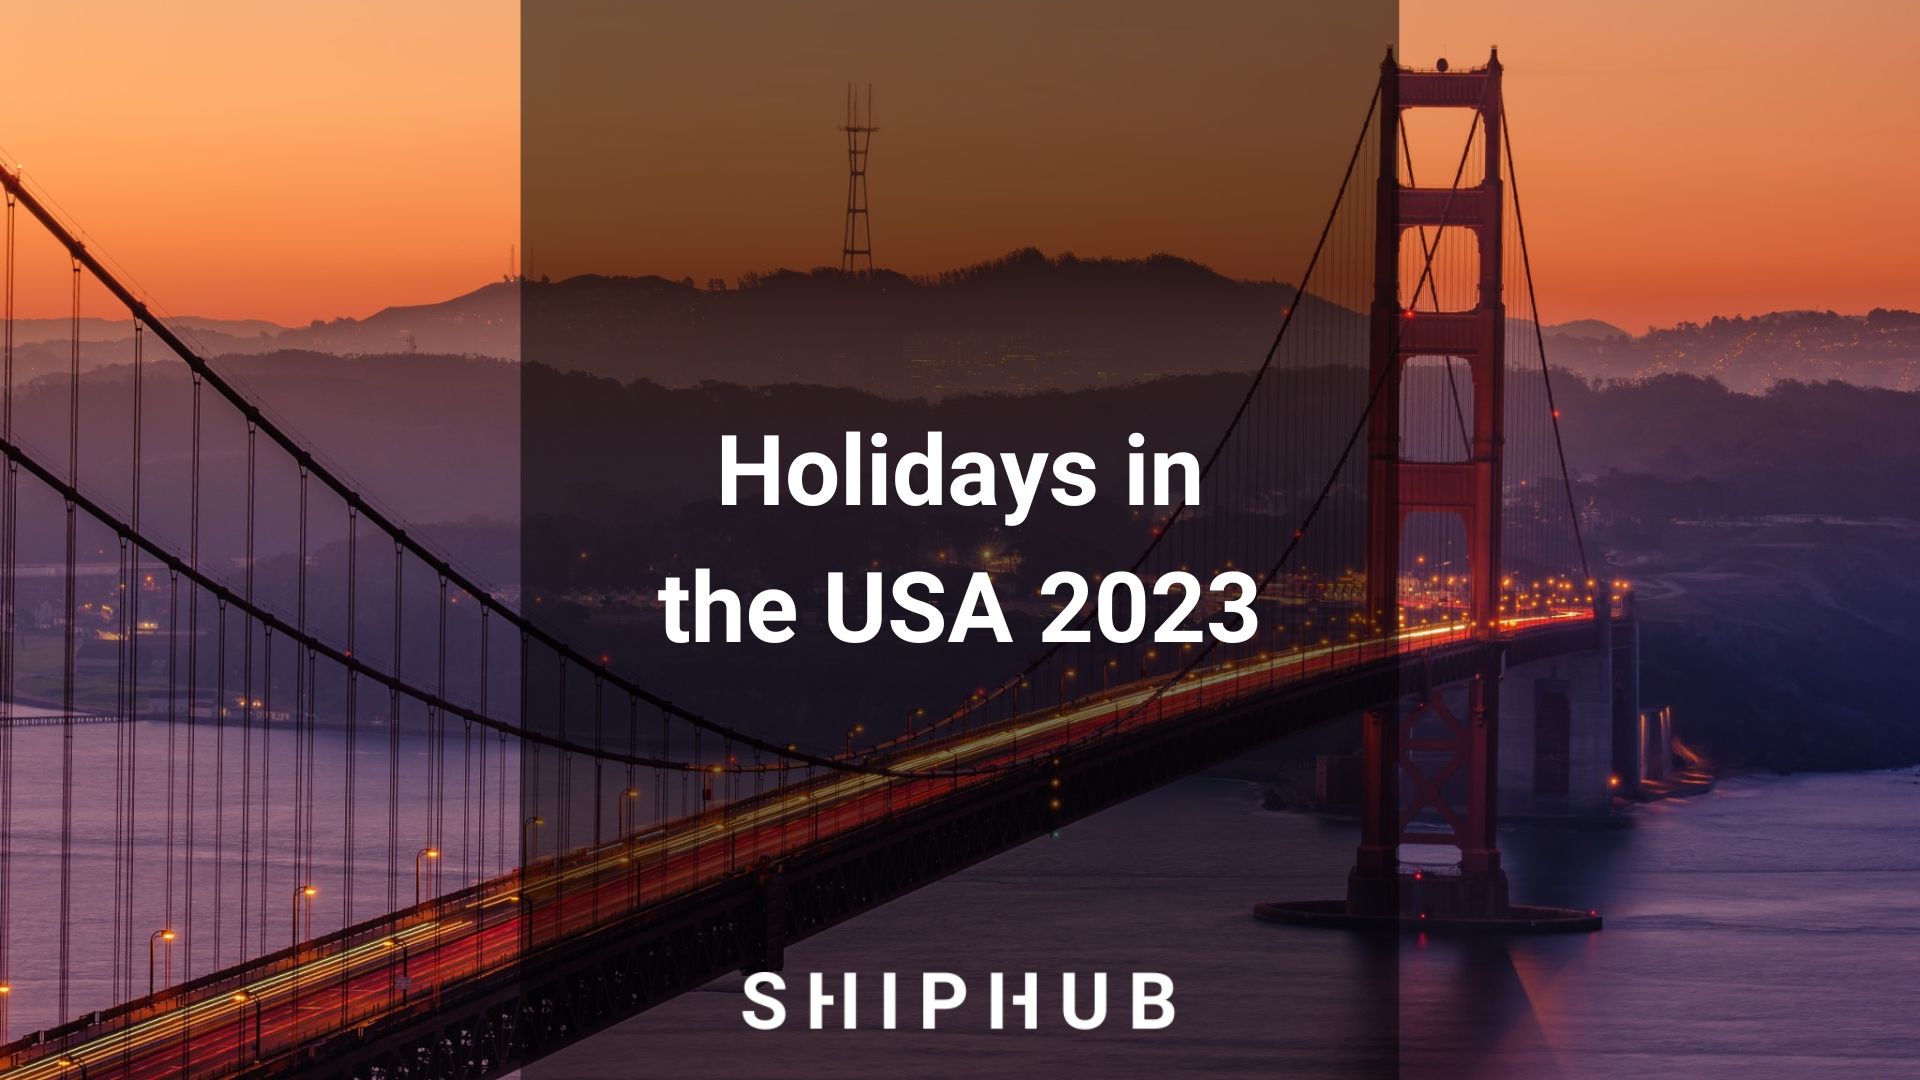 Holidays in the USA 2023